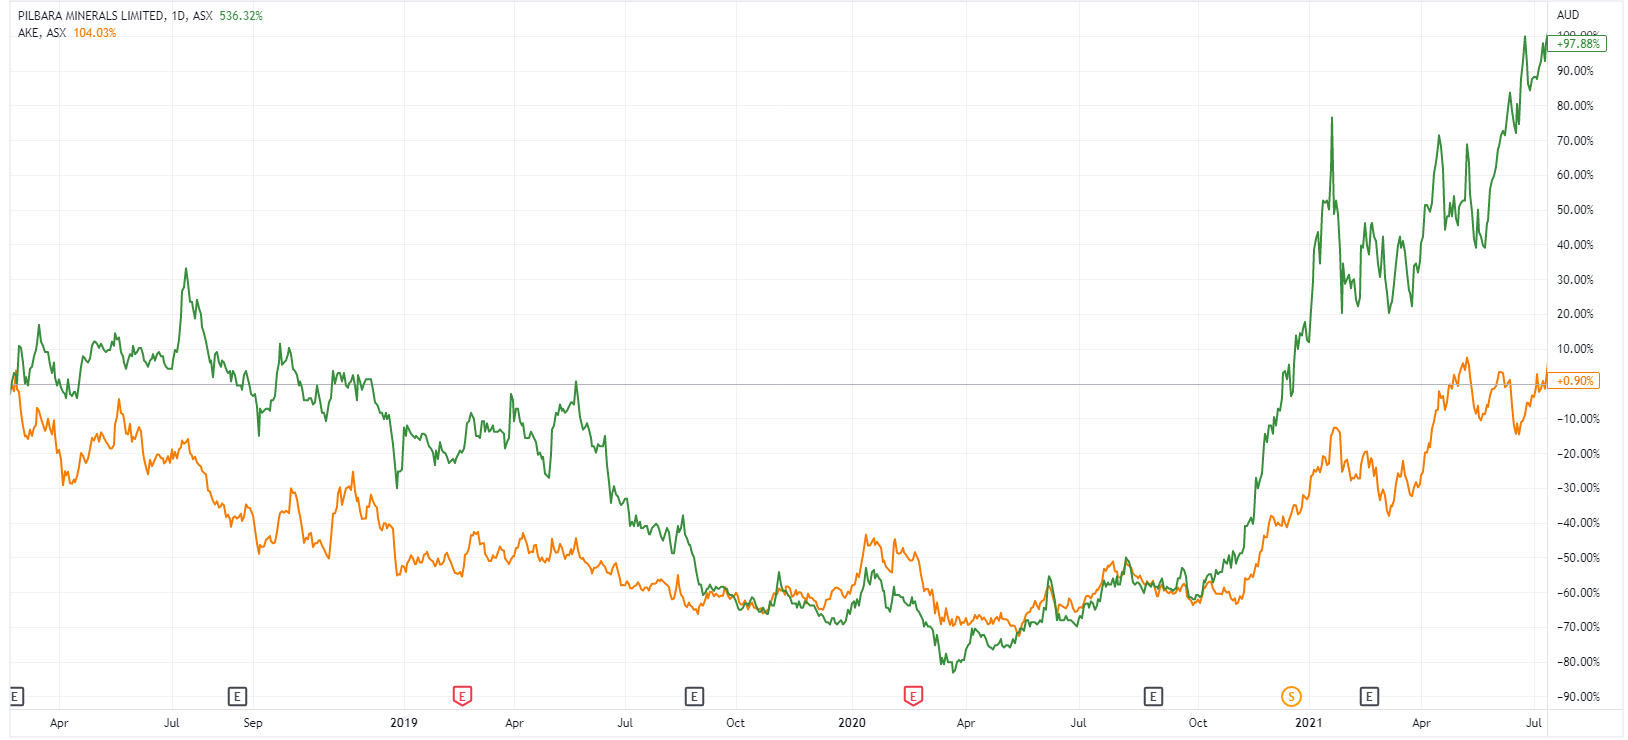 The Lithium sector experienced a broad-based bottom around November 2020. They quickly hit 52-week highs and cleared 2018 highs just a few months later. (Source: TradingView)